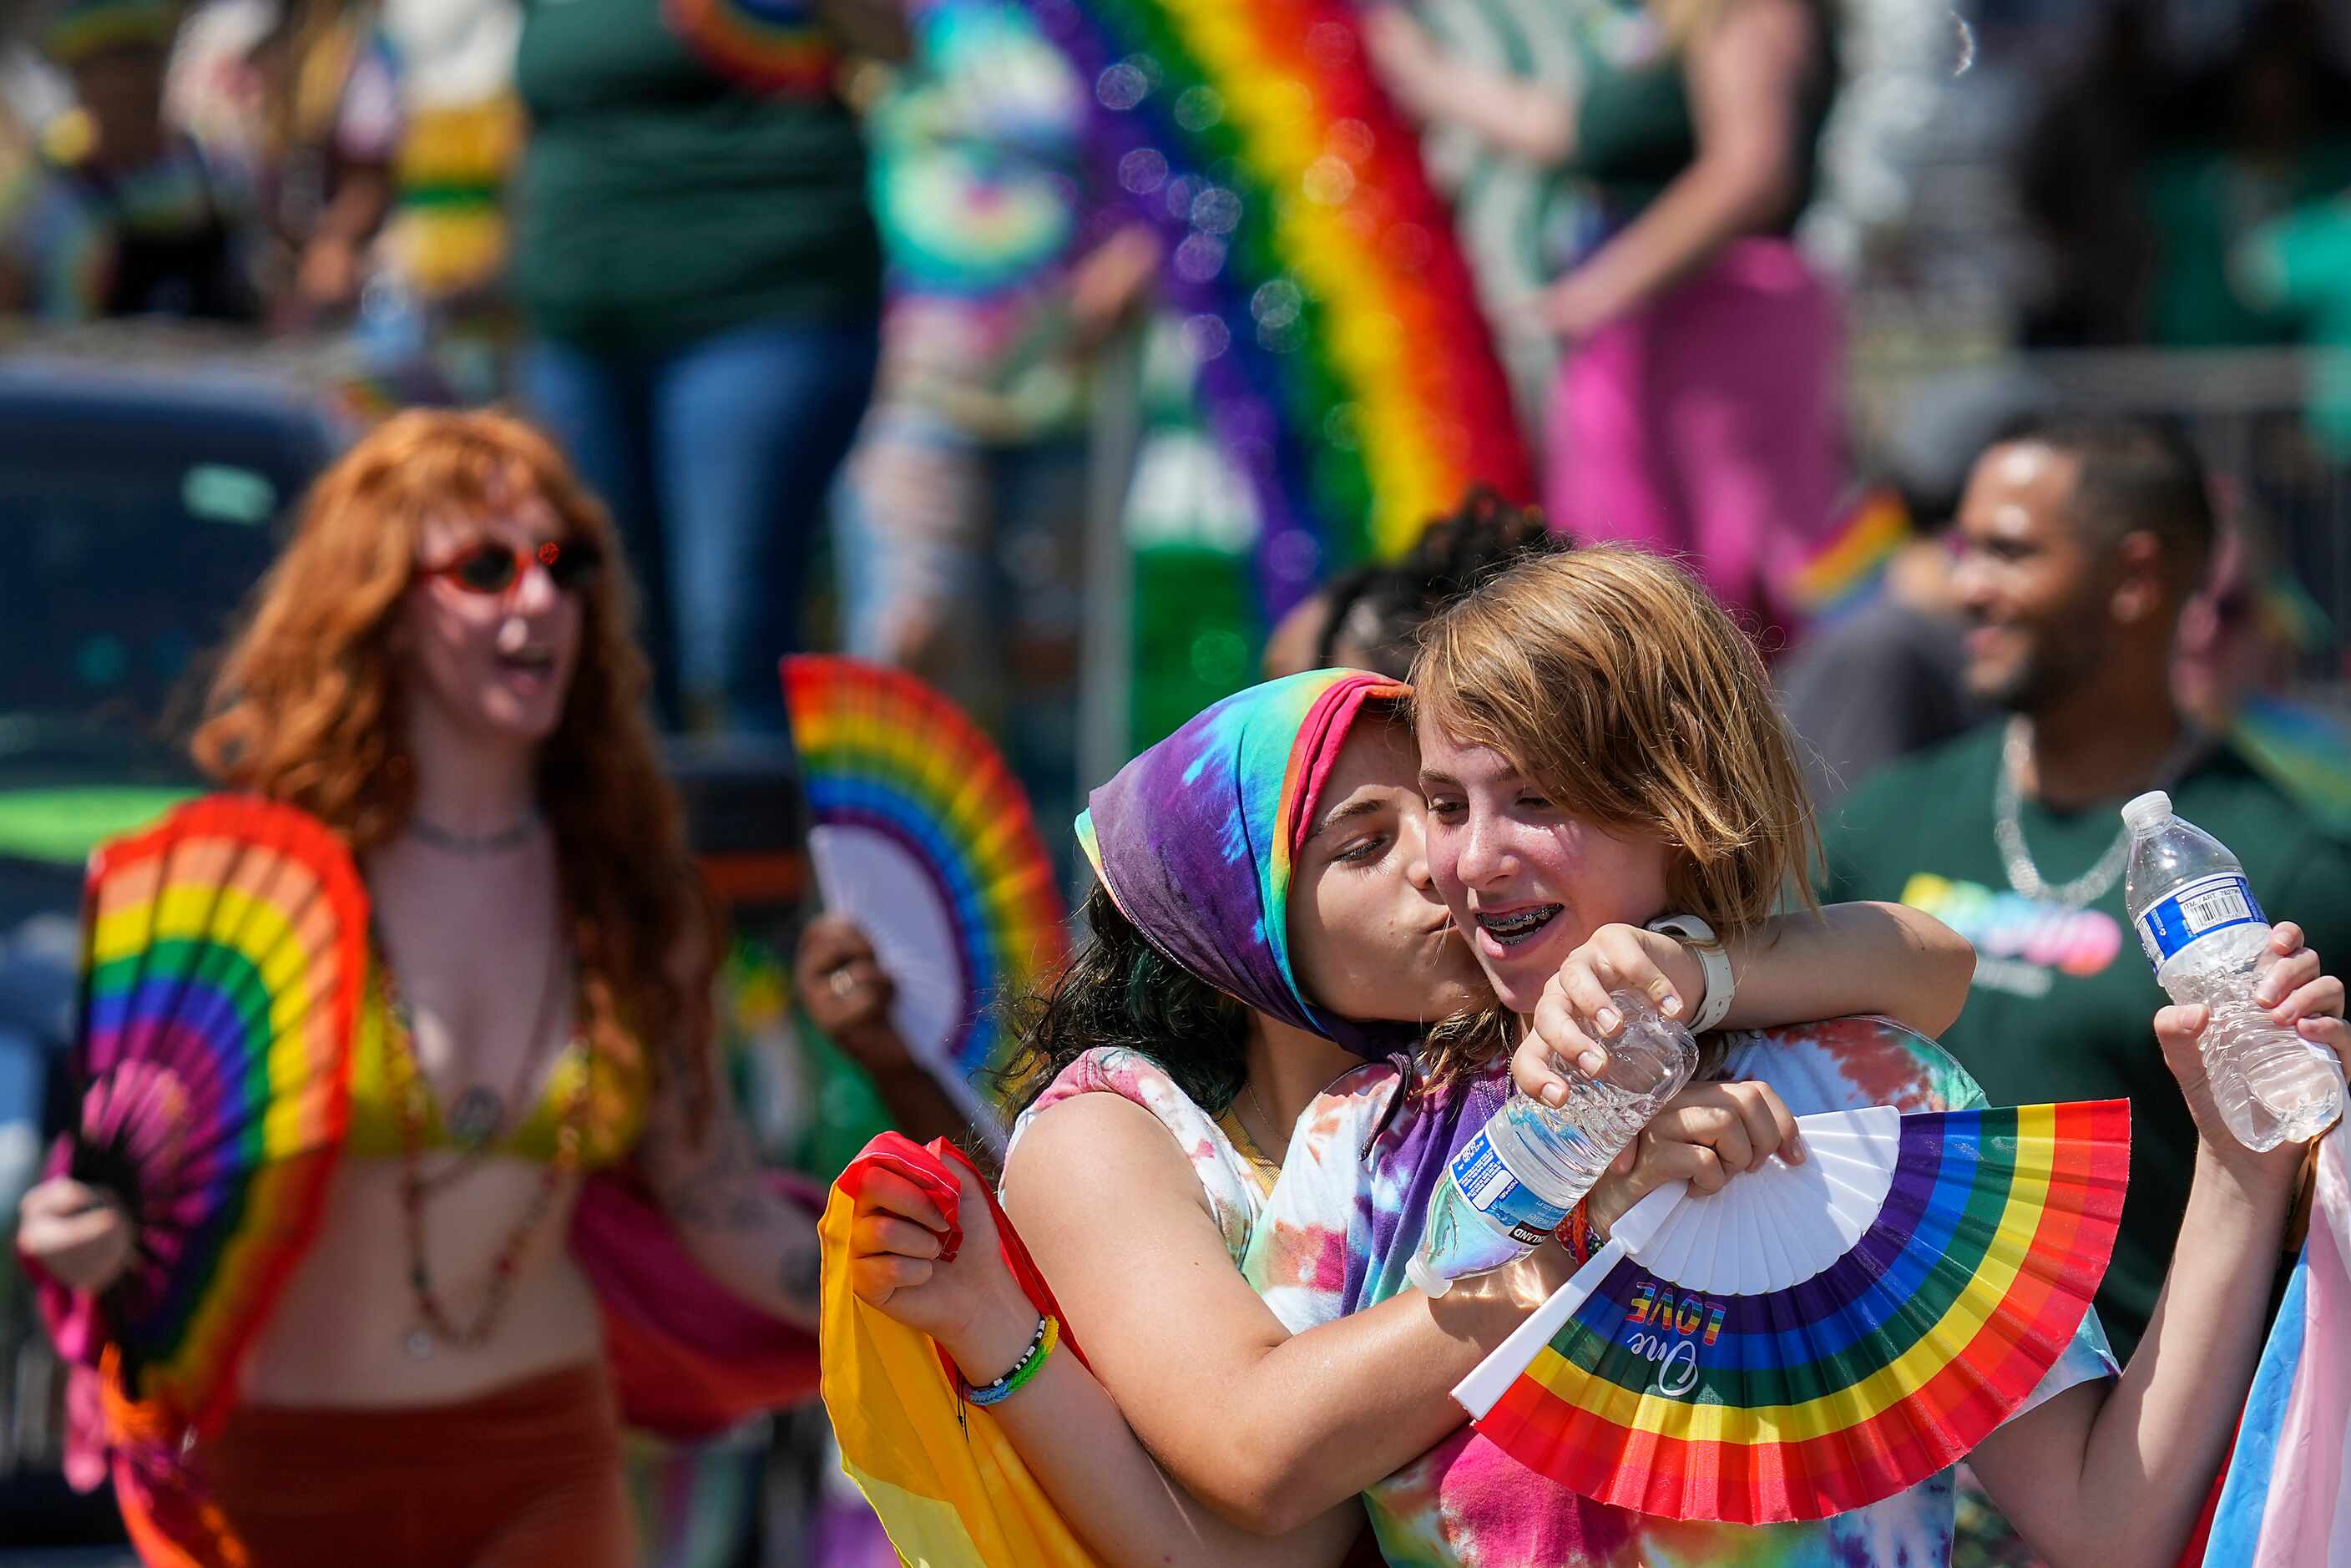 Kailey Bickham gets a kiss from Mira Jabba
as they march through Fair Park during the annual...